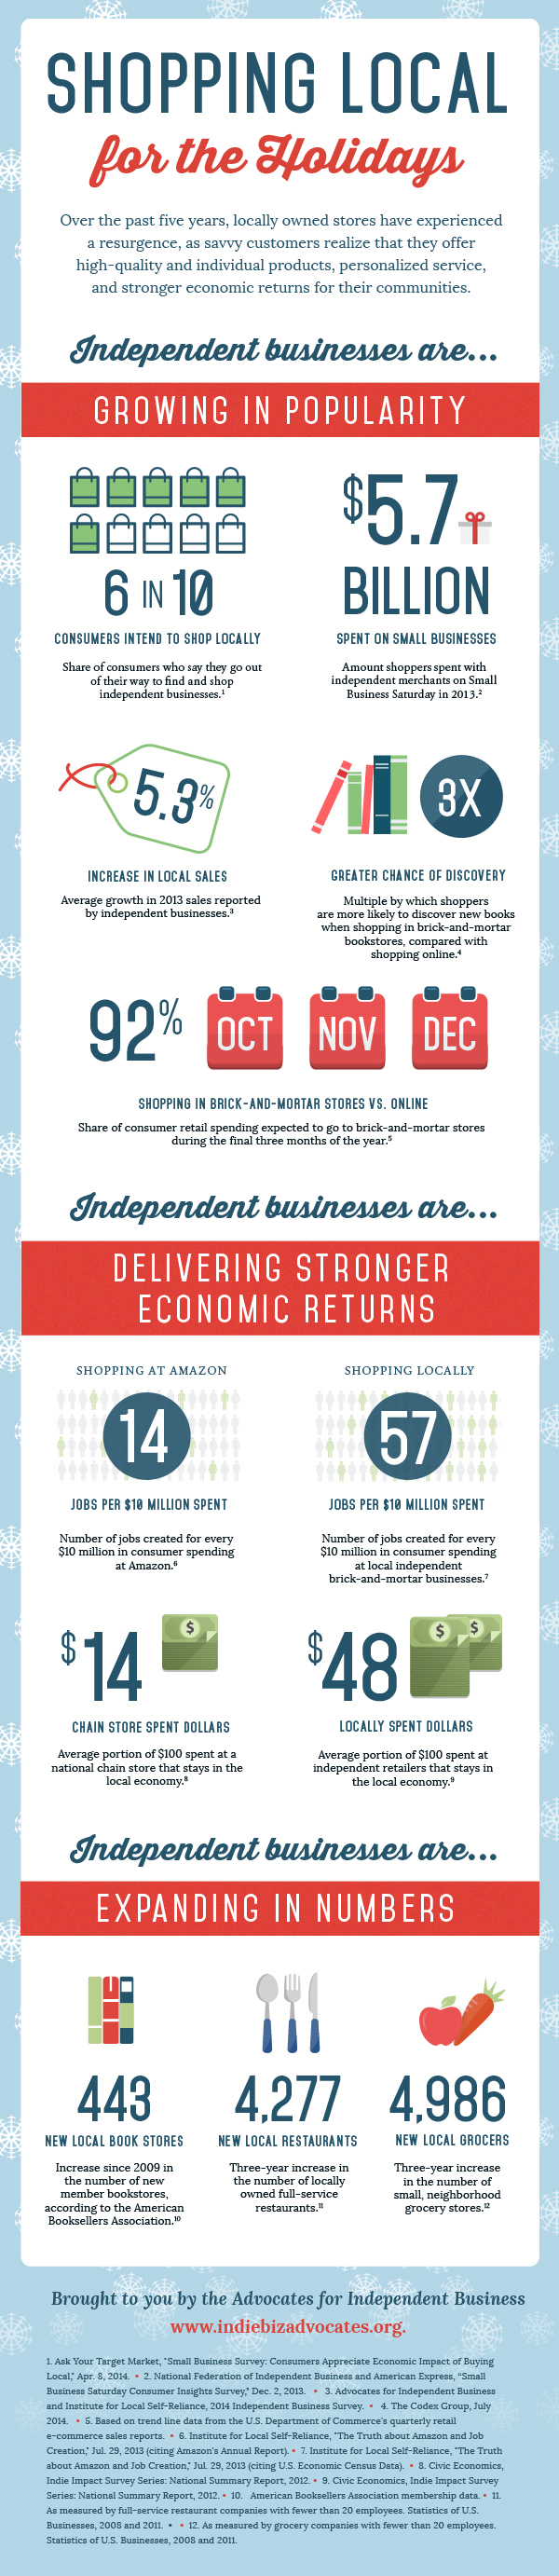 HolidayShopping_Infographic_final_HR